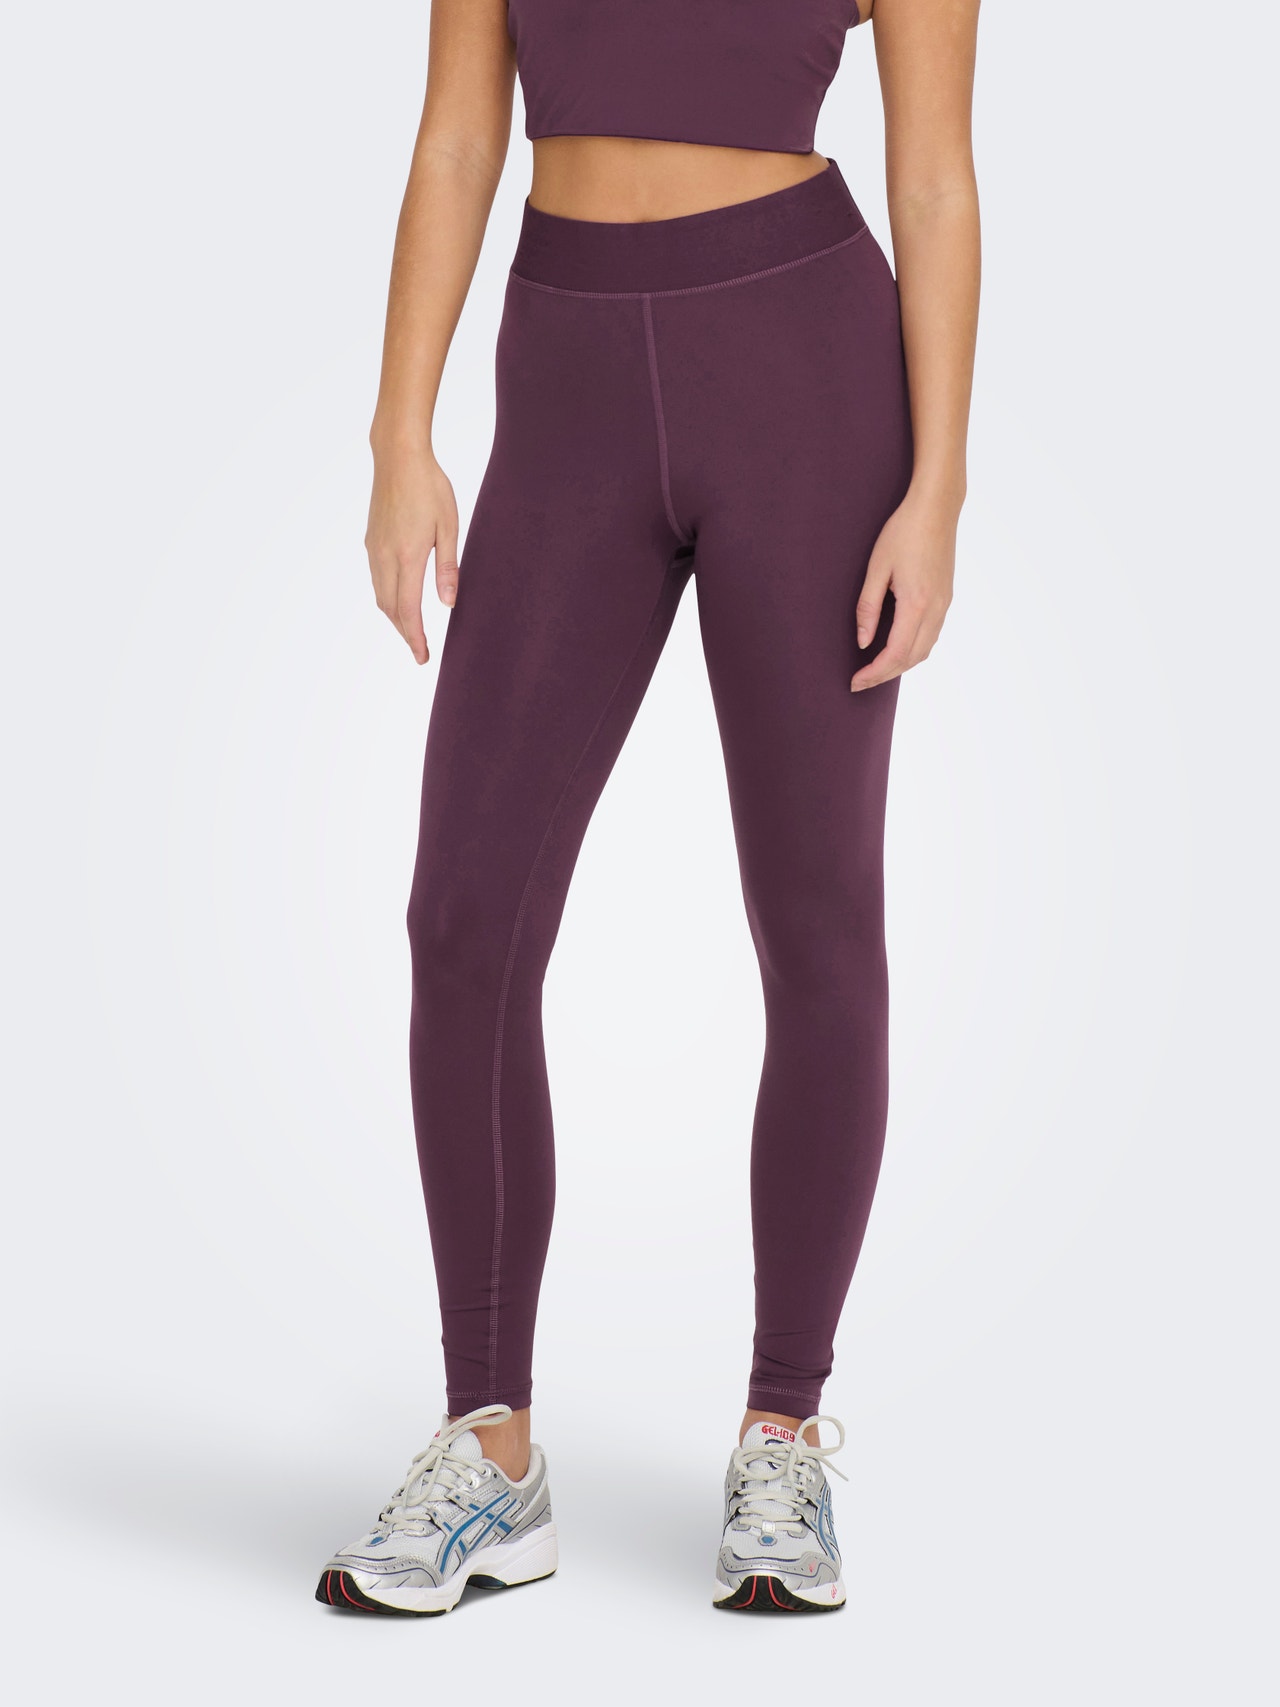 ONLY Tight fit High waist Legging -Eggplant - 15274112